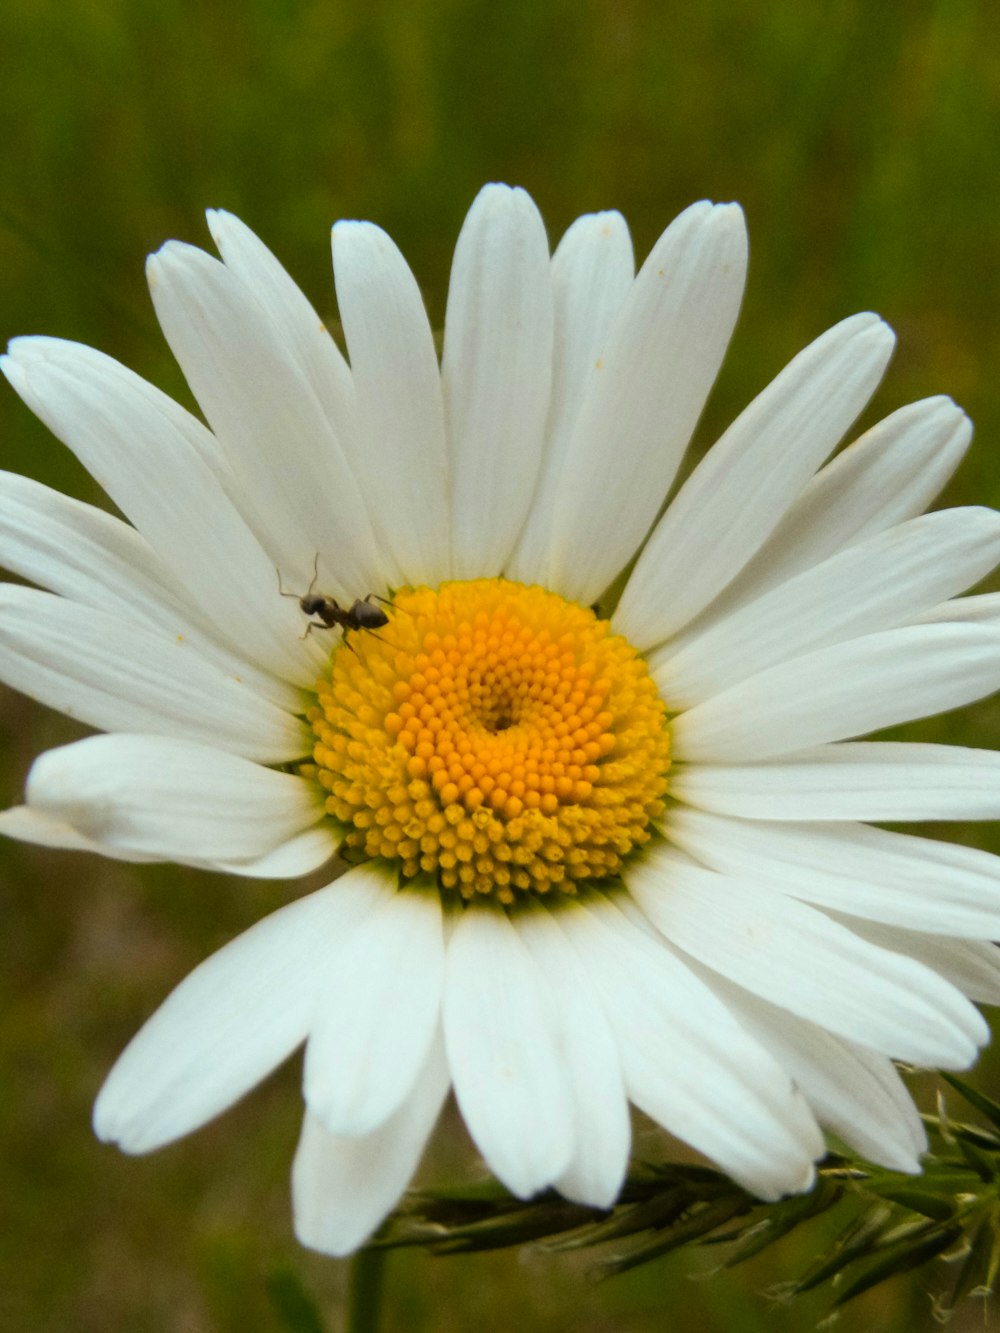 black and brown bug on white daisy in close up photography during daytime